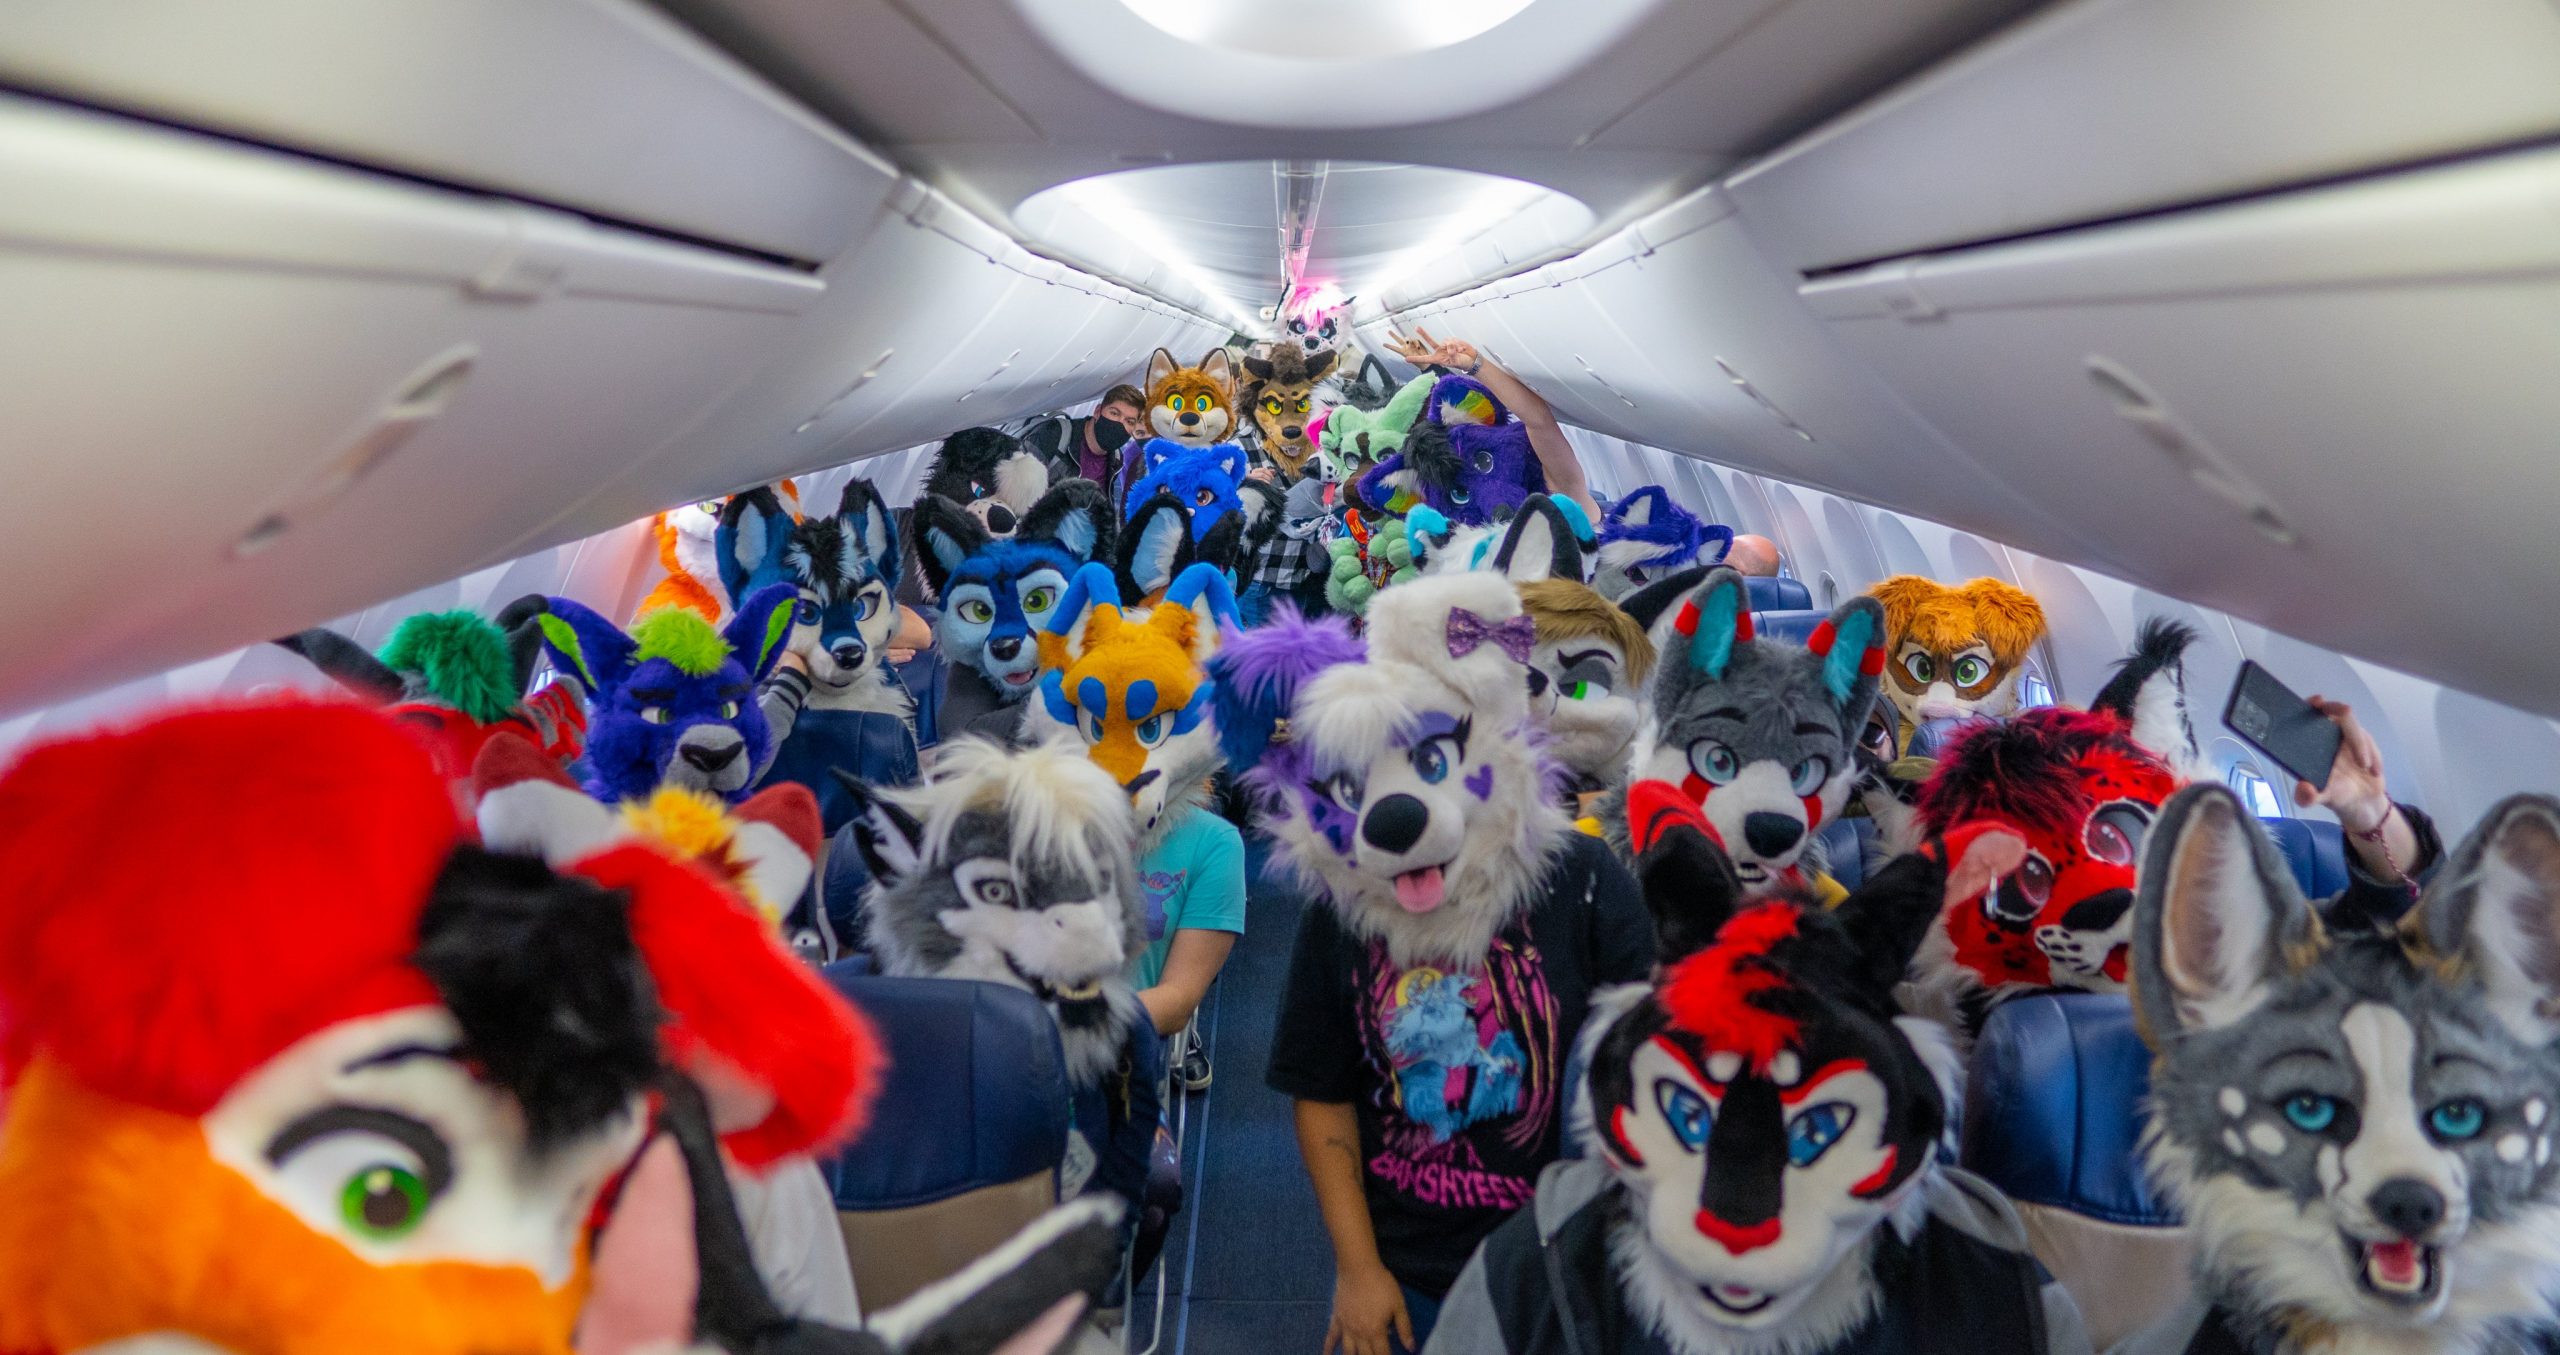 Furries On a Plane: Southwest Airlines Flight Taken Over By Animal Costumes...